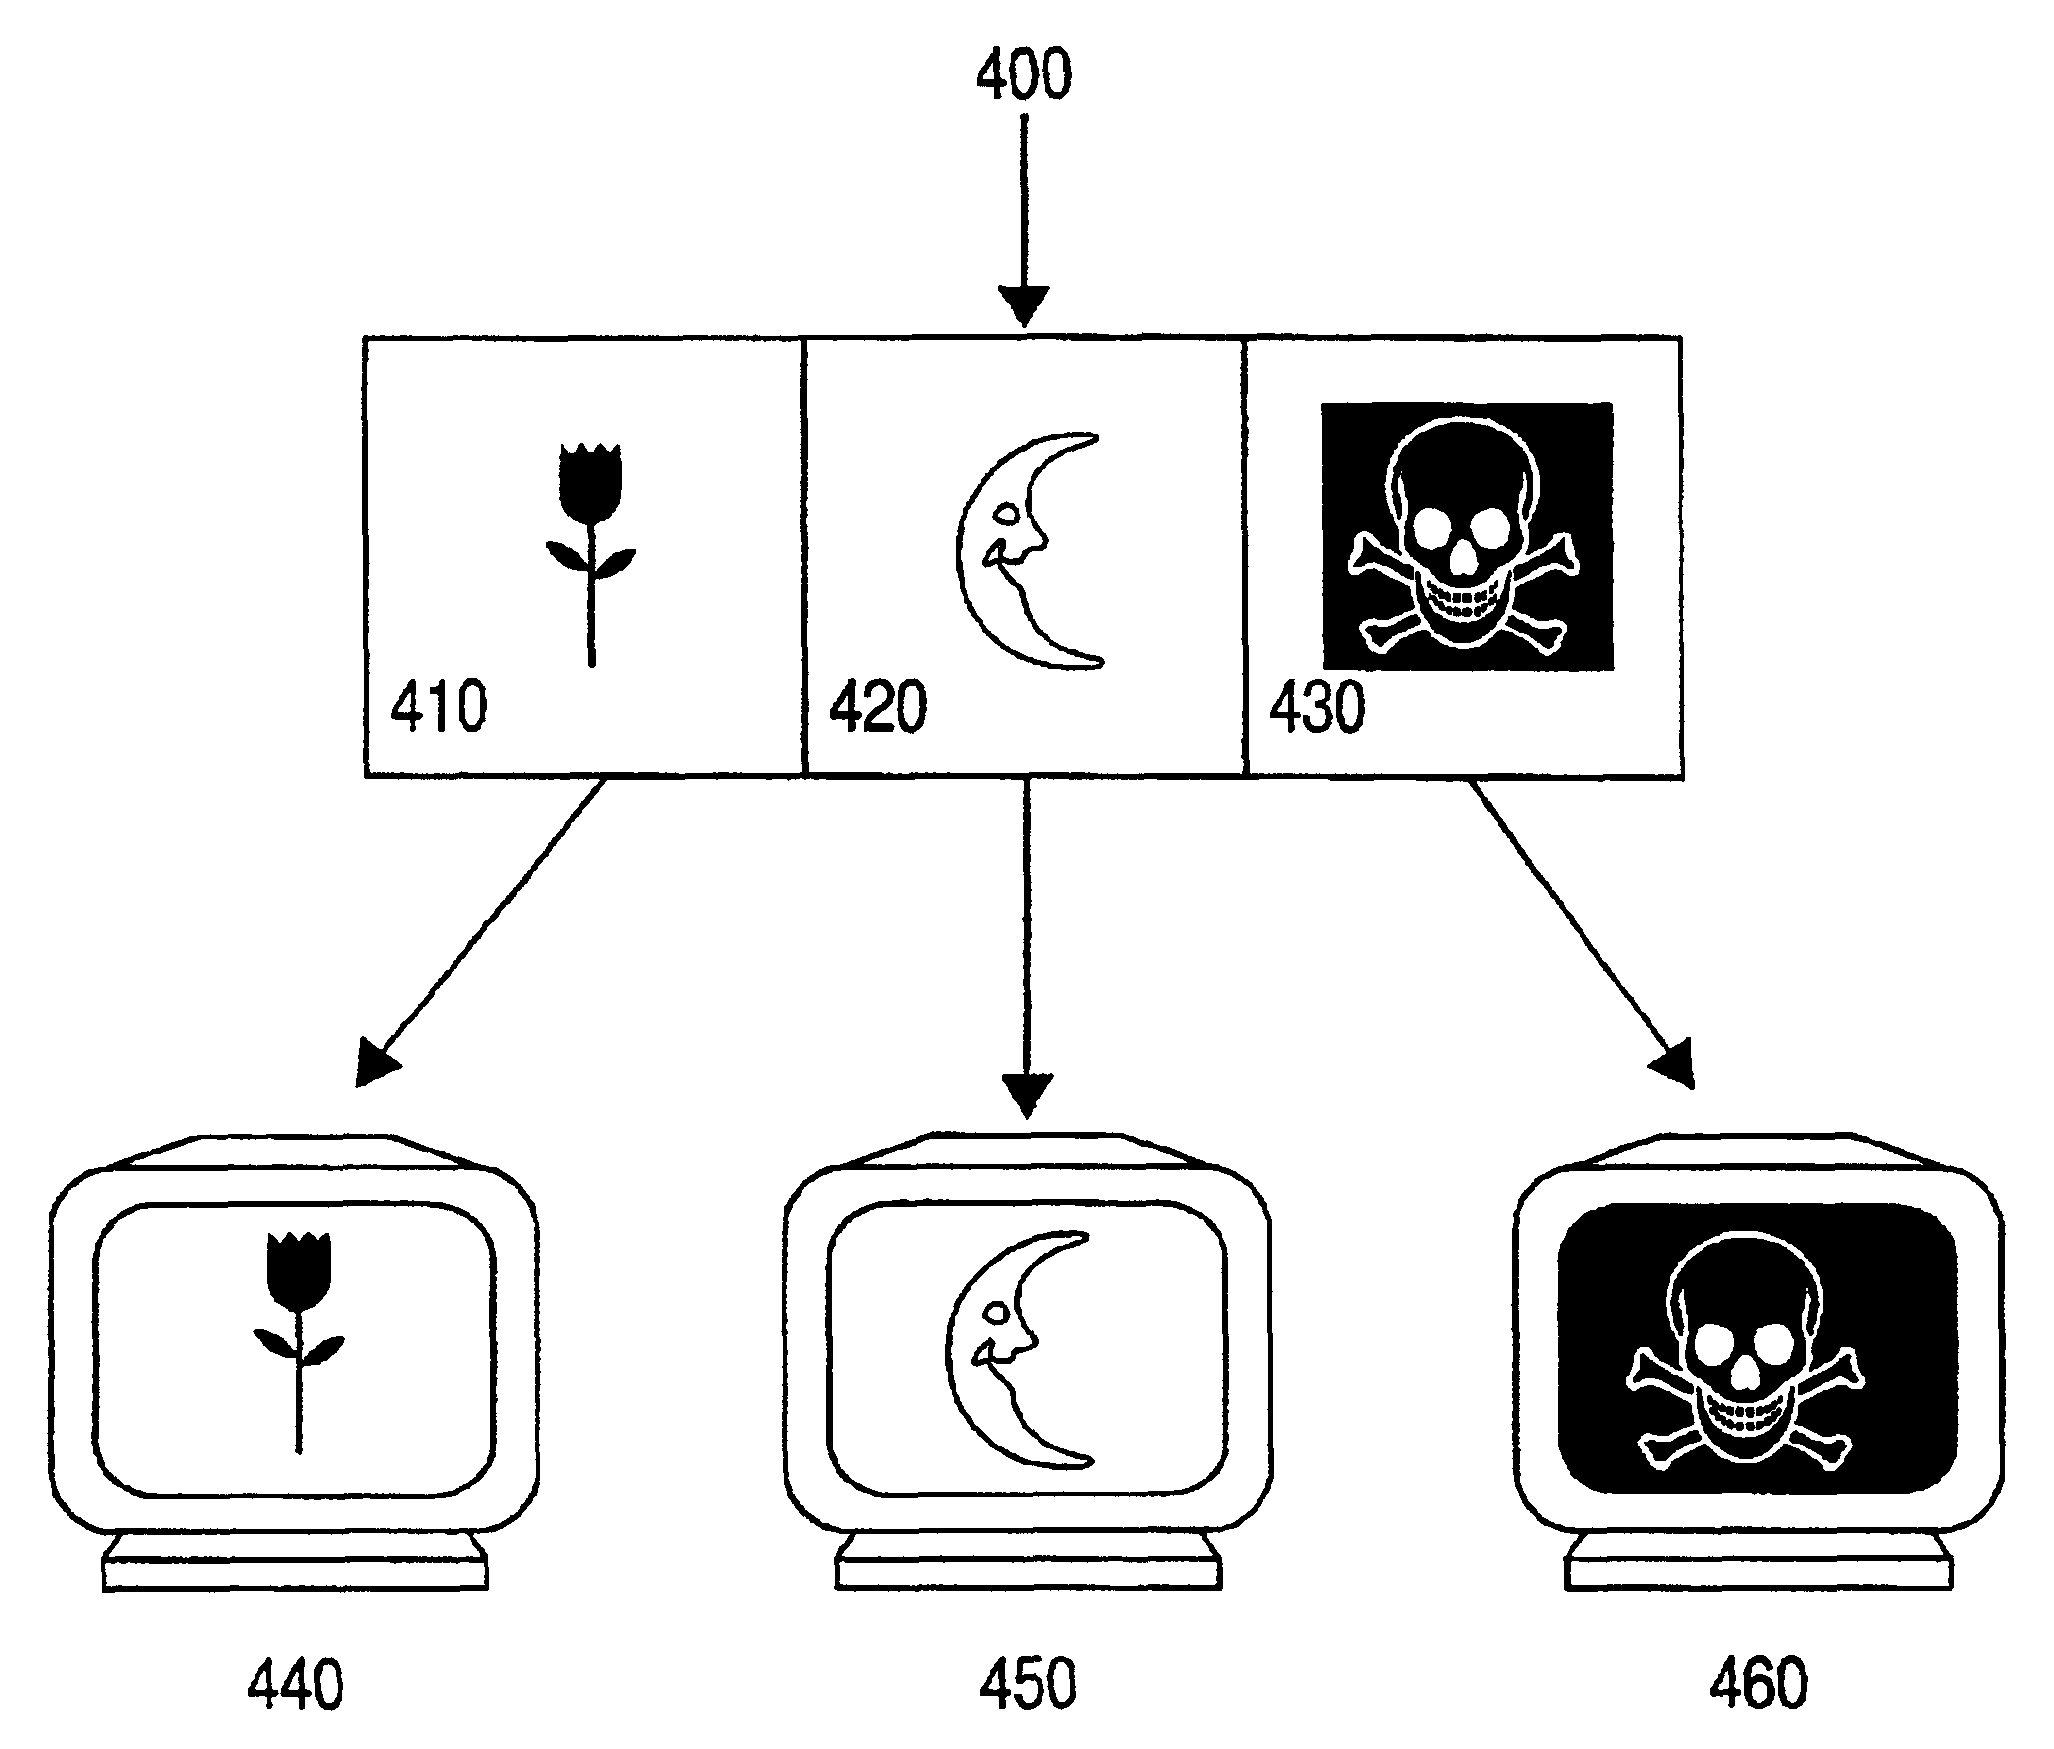 Associating multiple display units in a grouped server environment